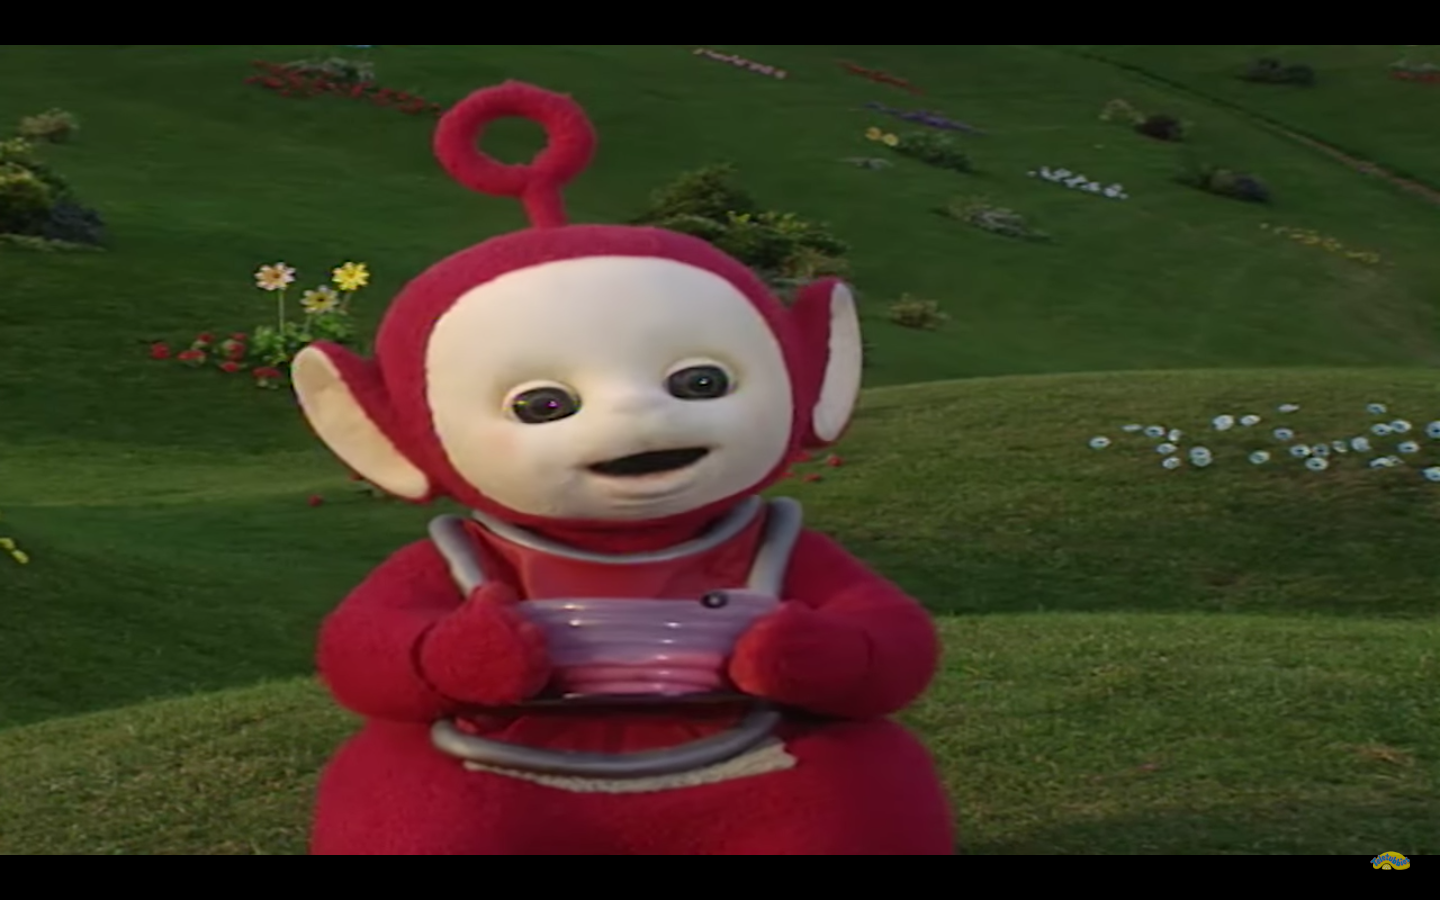 S'poreans are freaking out over the revelation that Po (the Teletubby